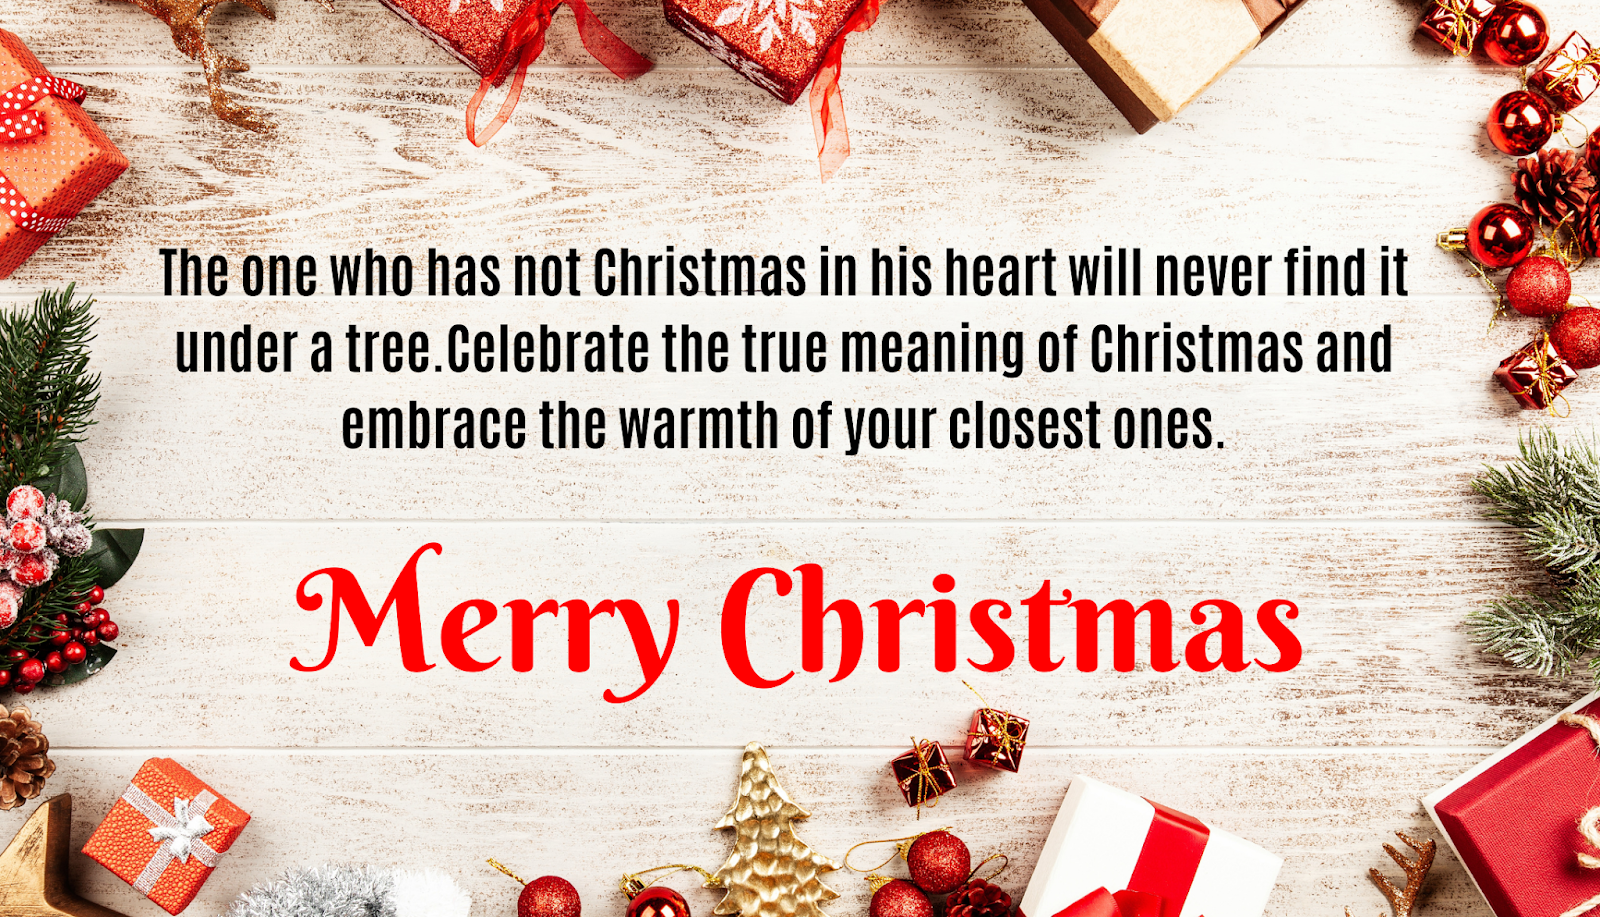 50+ Whatsapp merry Christmas wishes images,Christmas Message & Photos